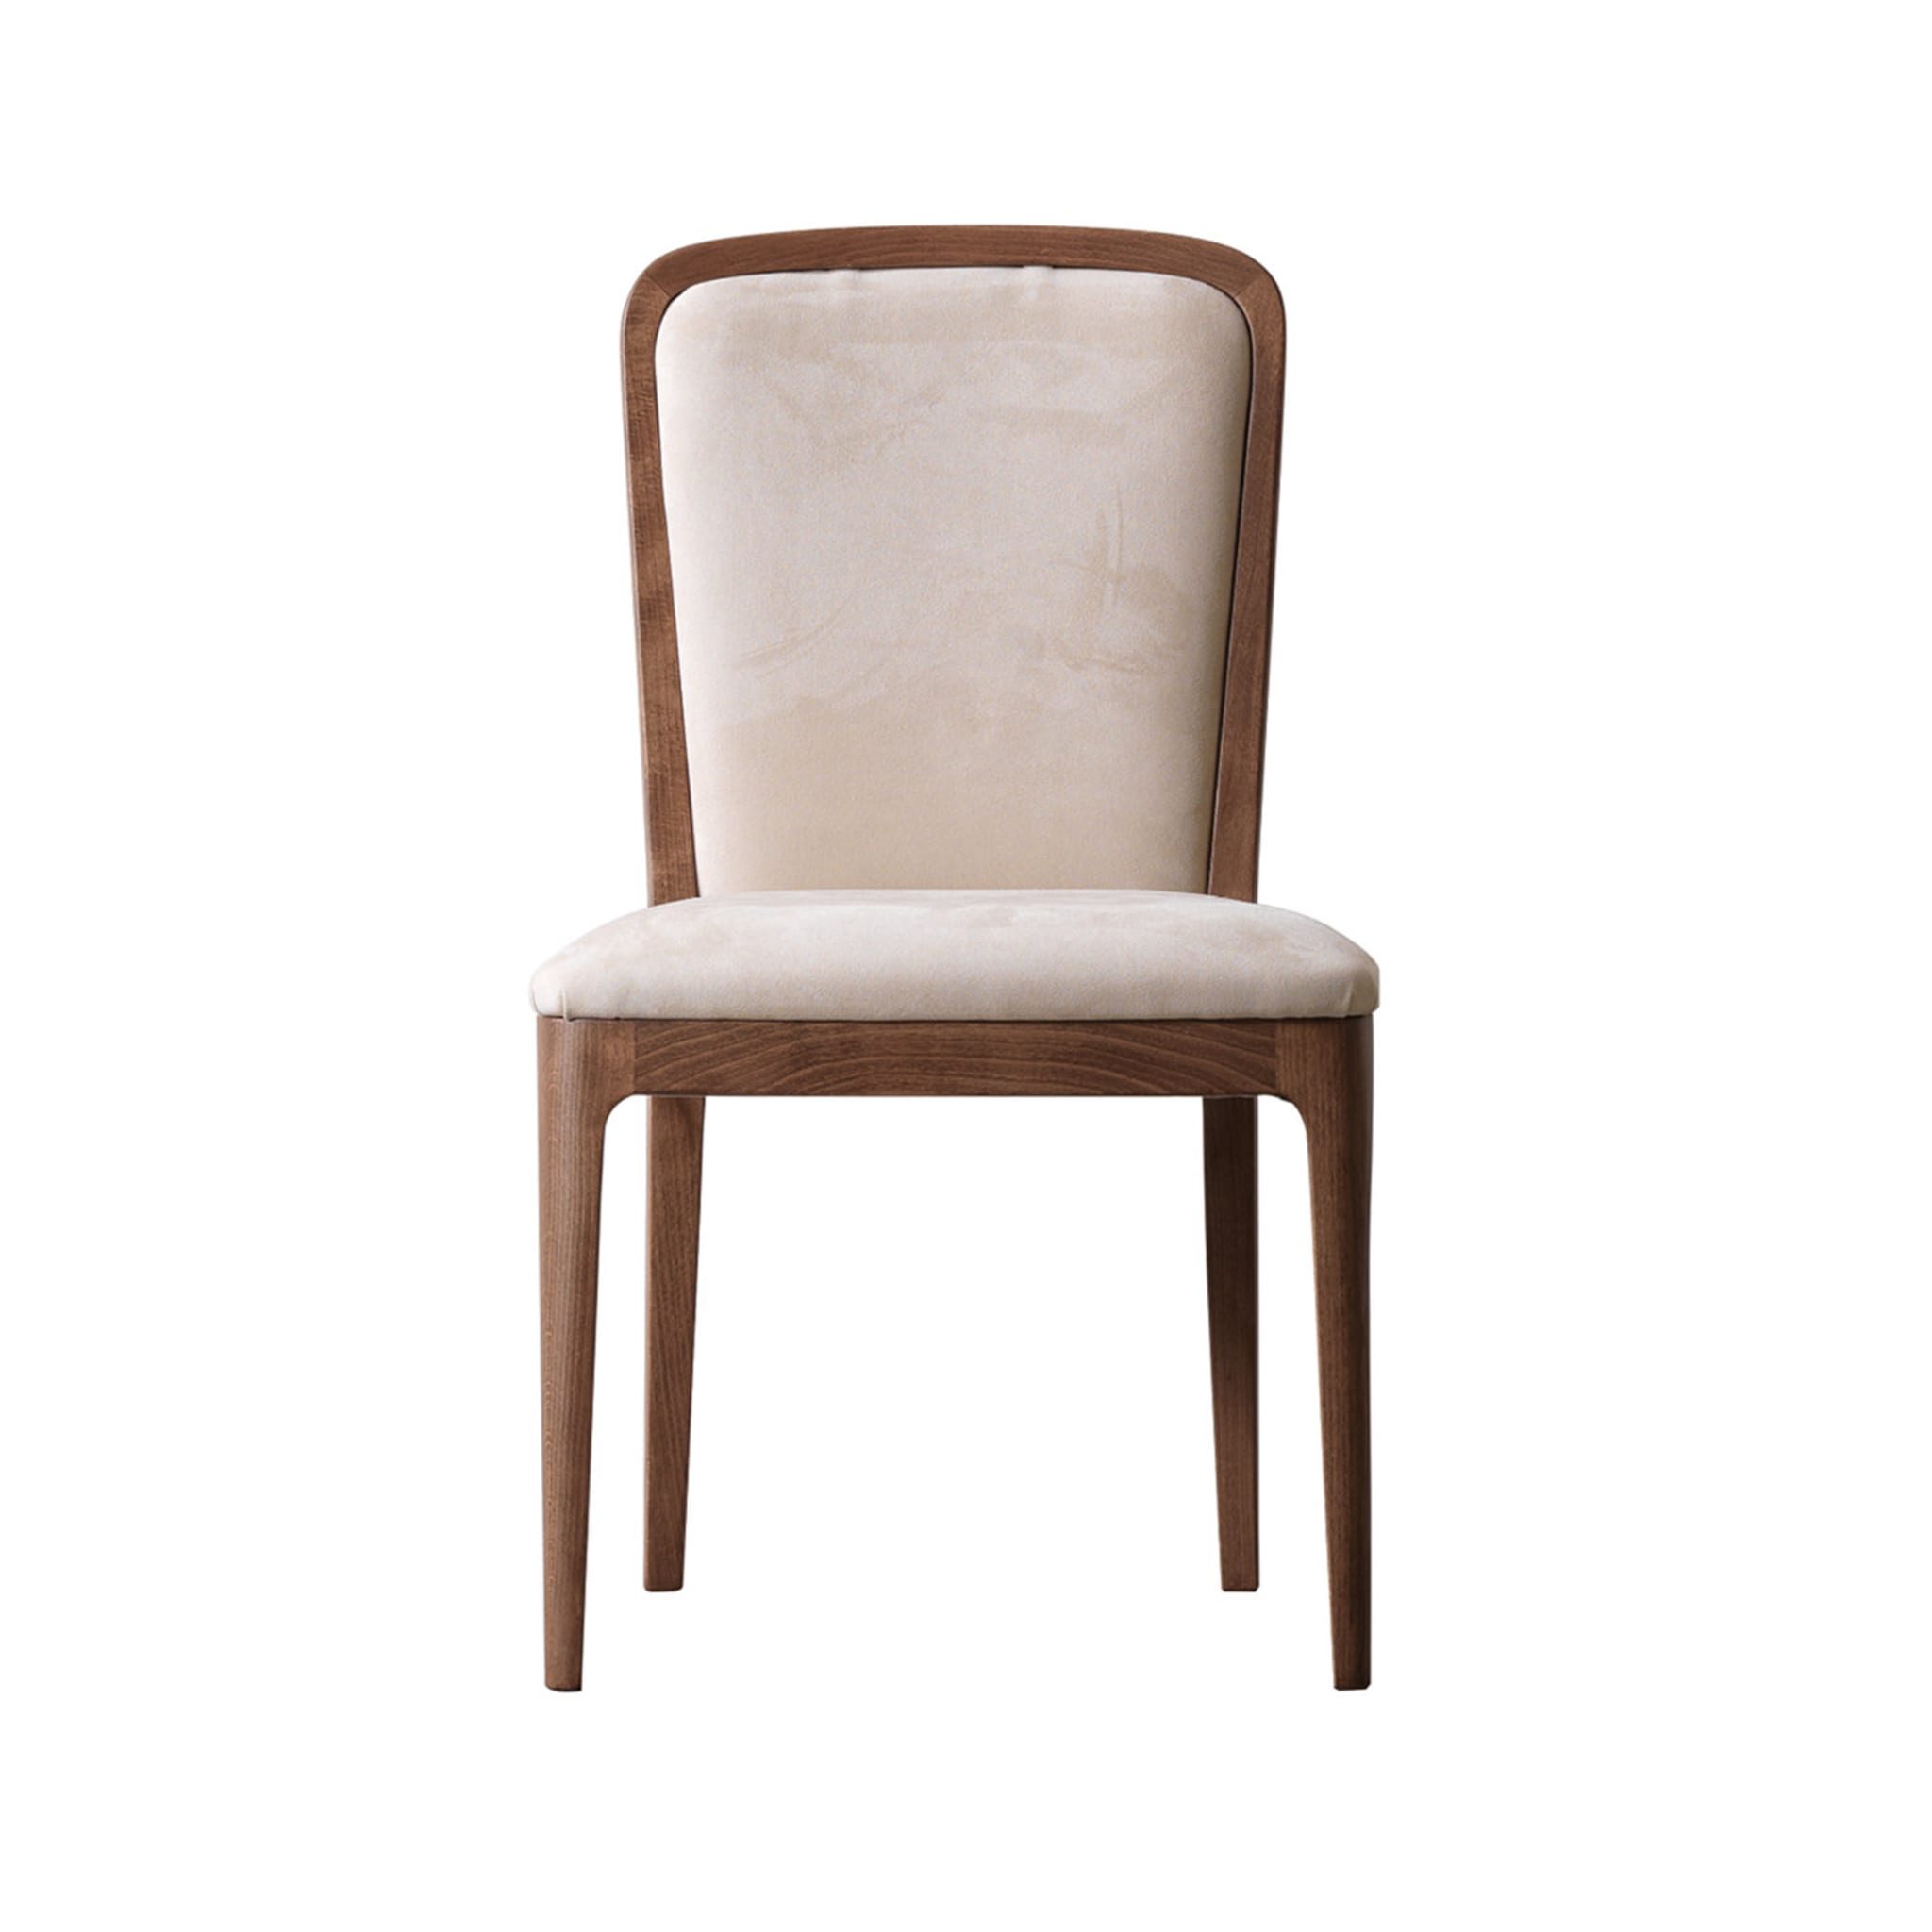 Domino Beige Dining Chair - Main view